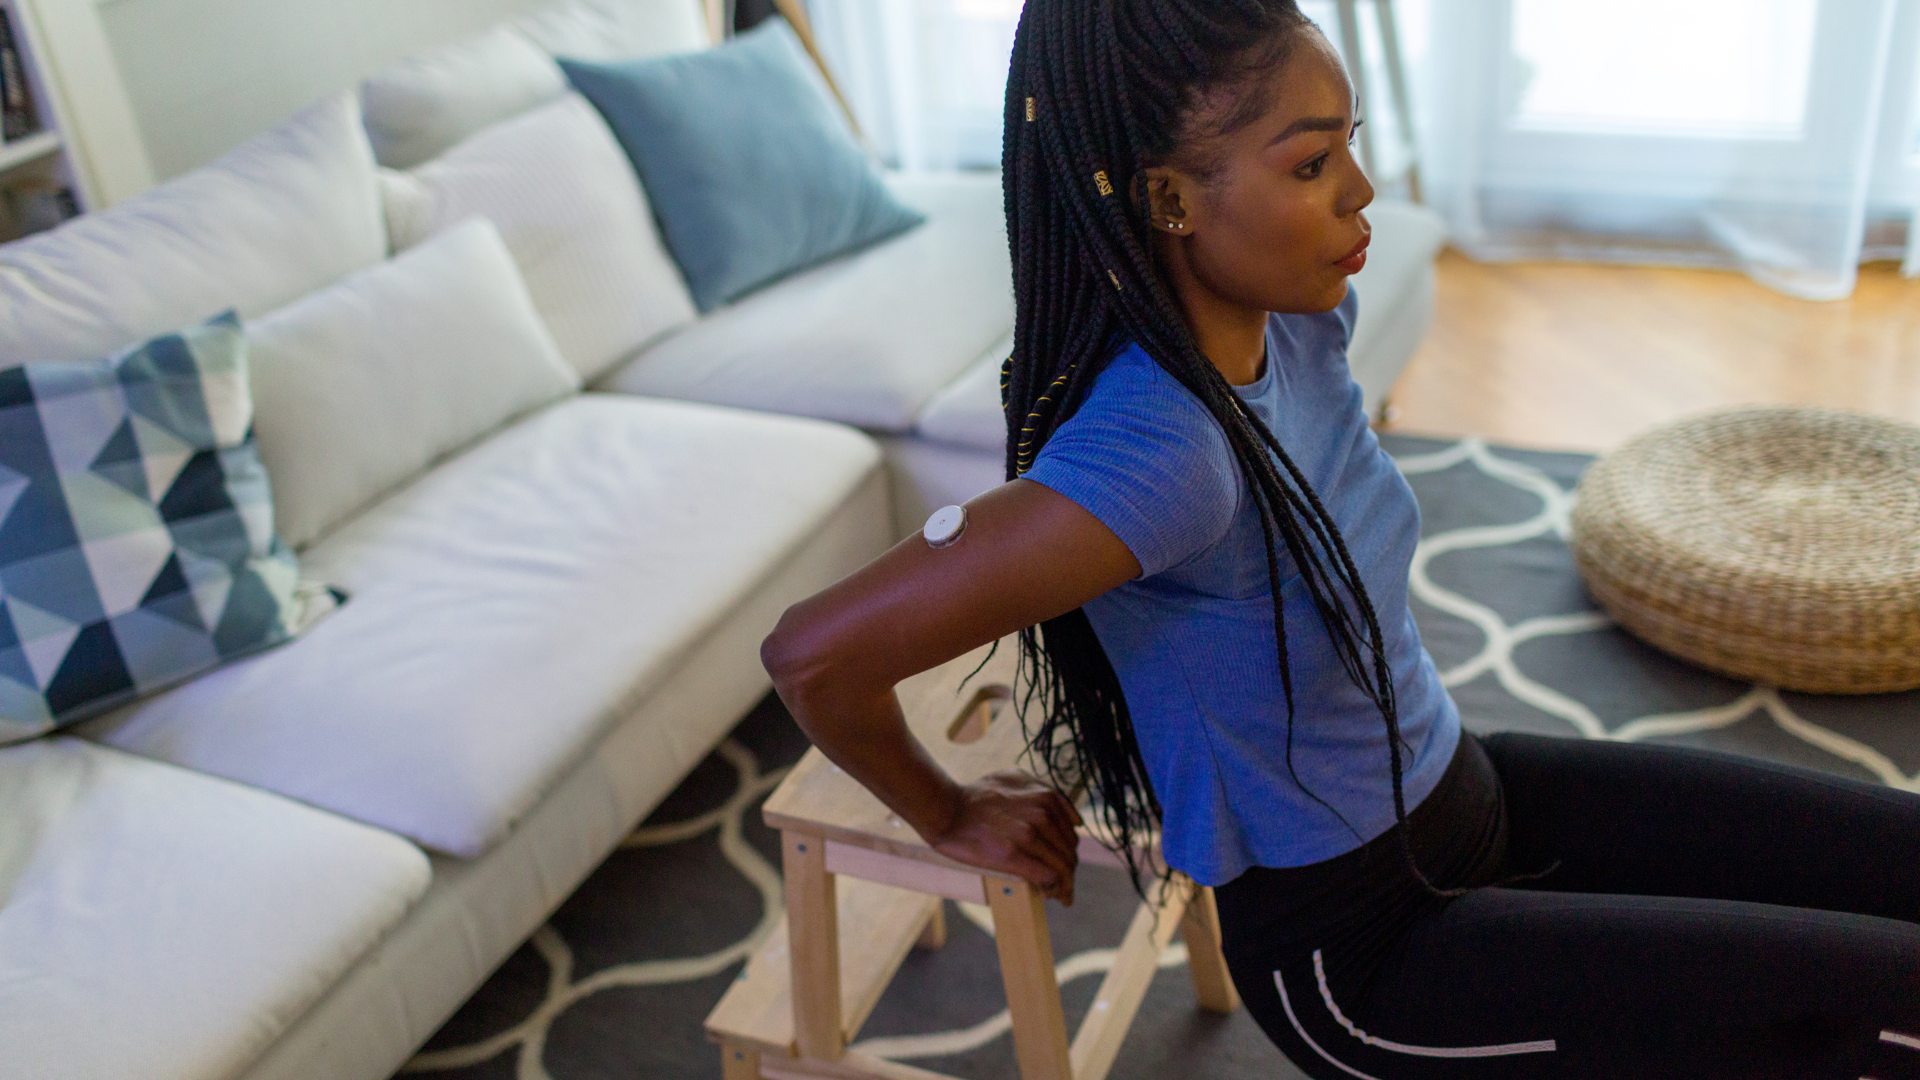 A young woman exercises by doing crunches in her living room.